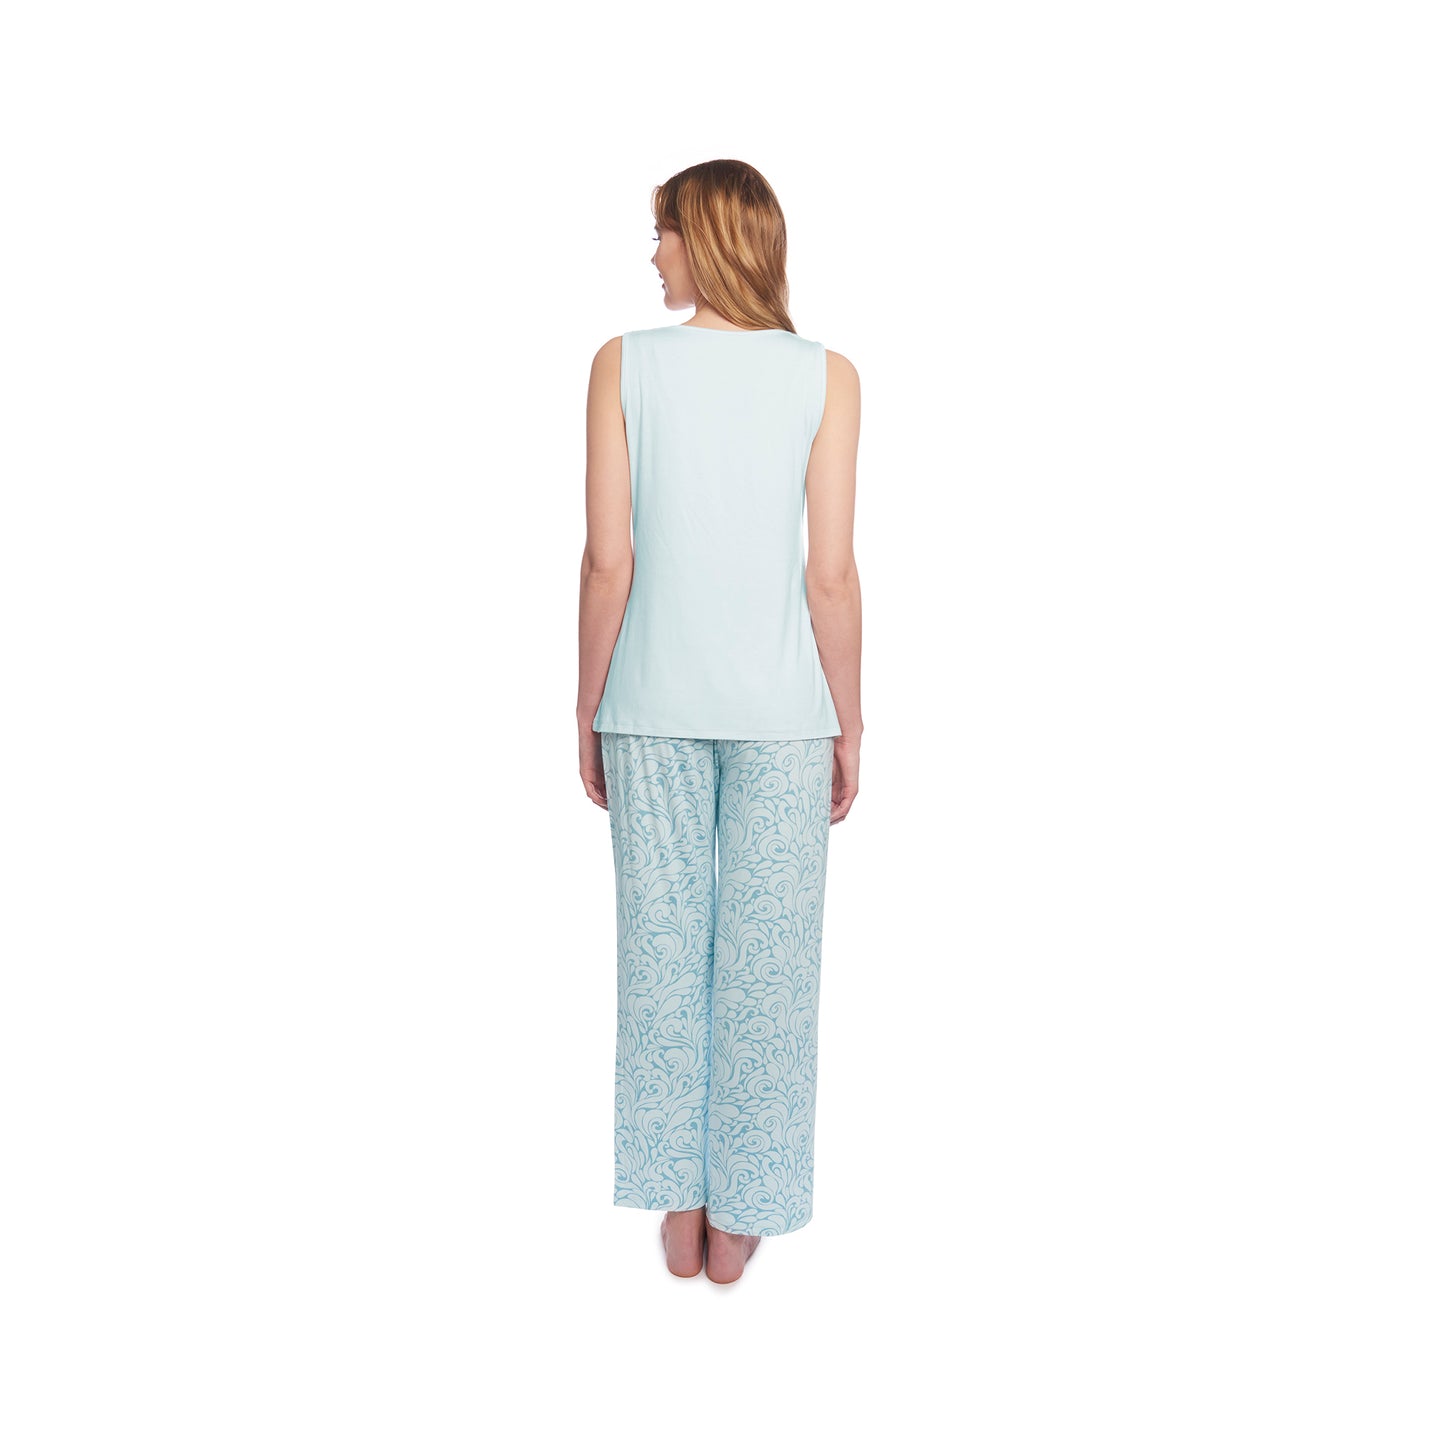 Waves Analise 3-Piece Set, back shot of woman wearing tank top and pant.